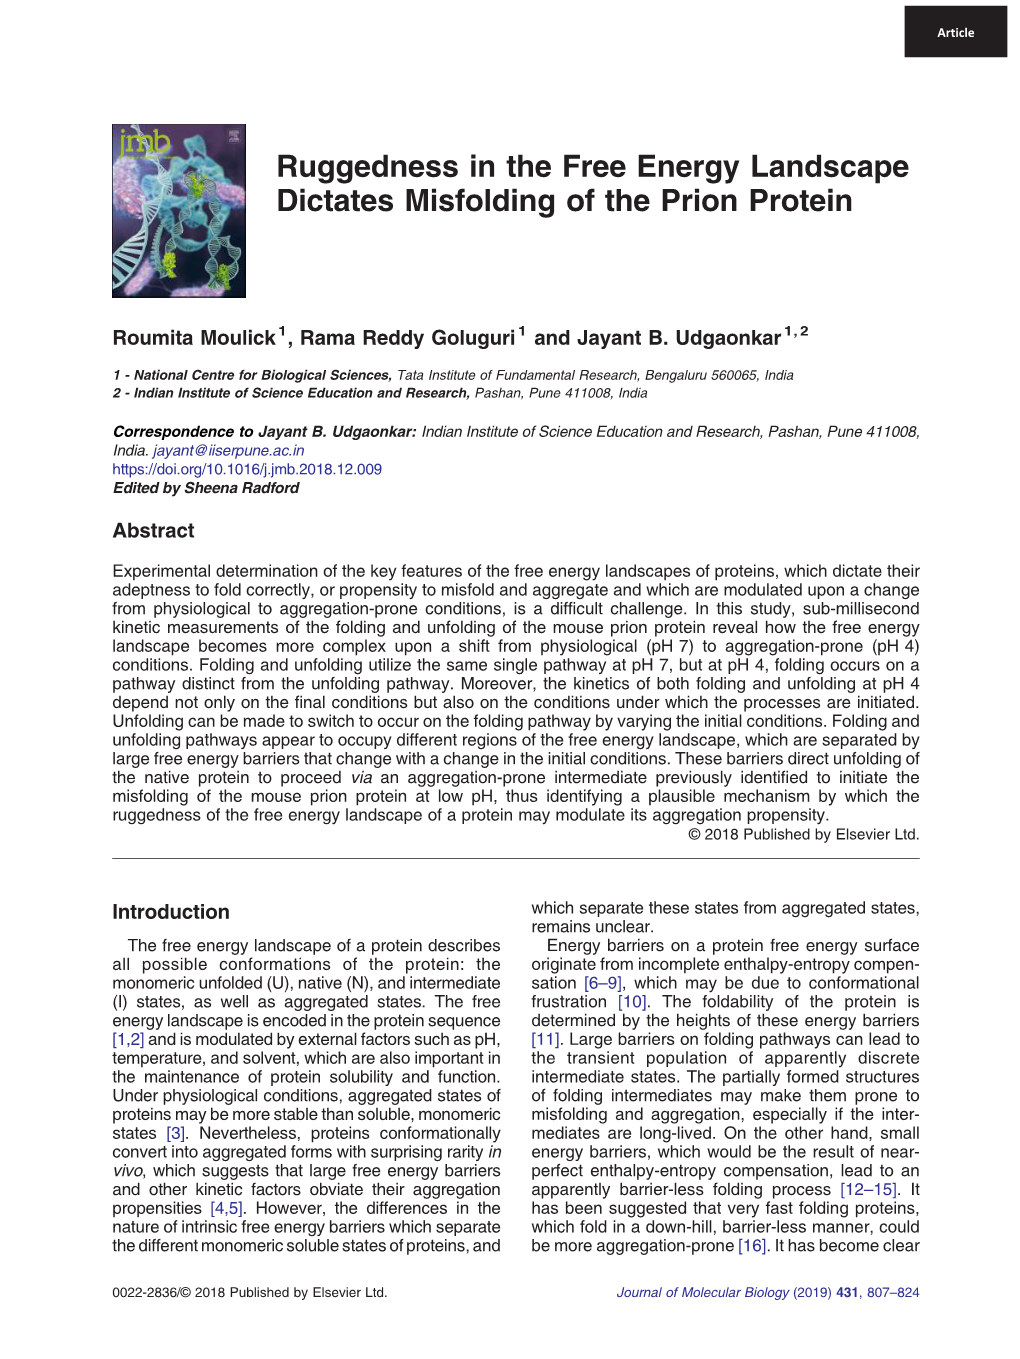 Ruggedness in the Free Energy Landscape Dictates Misfolding of the Prion Protein